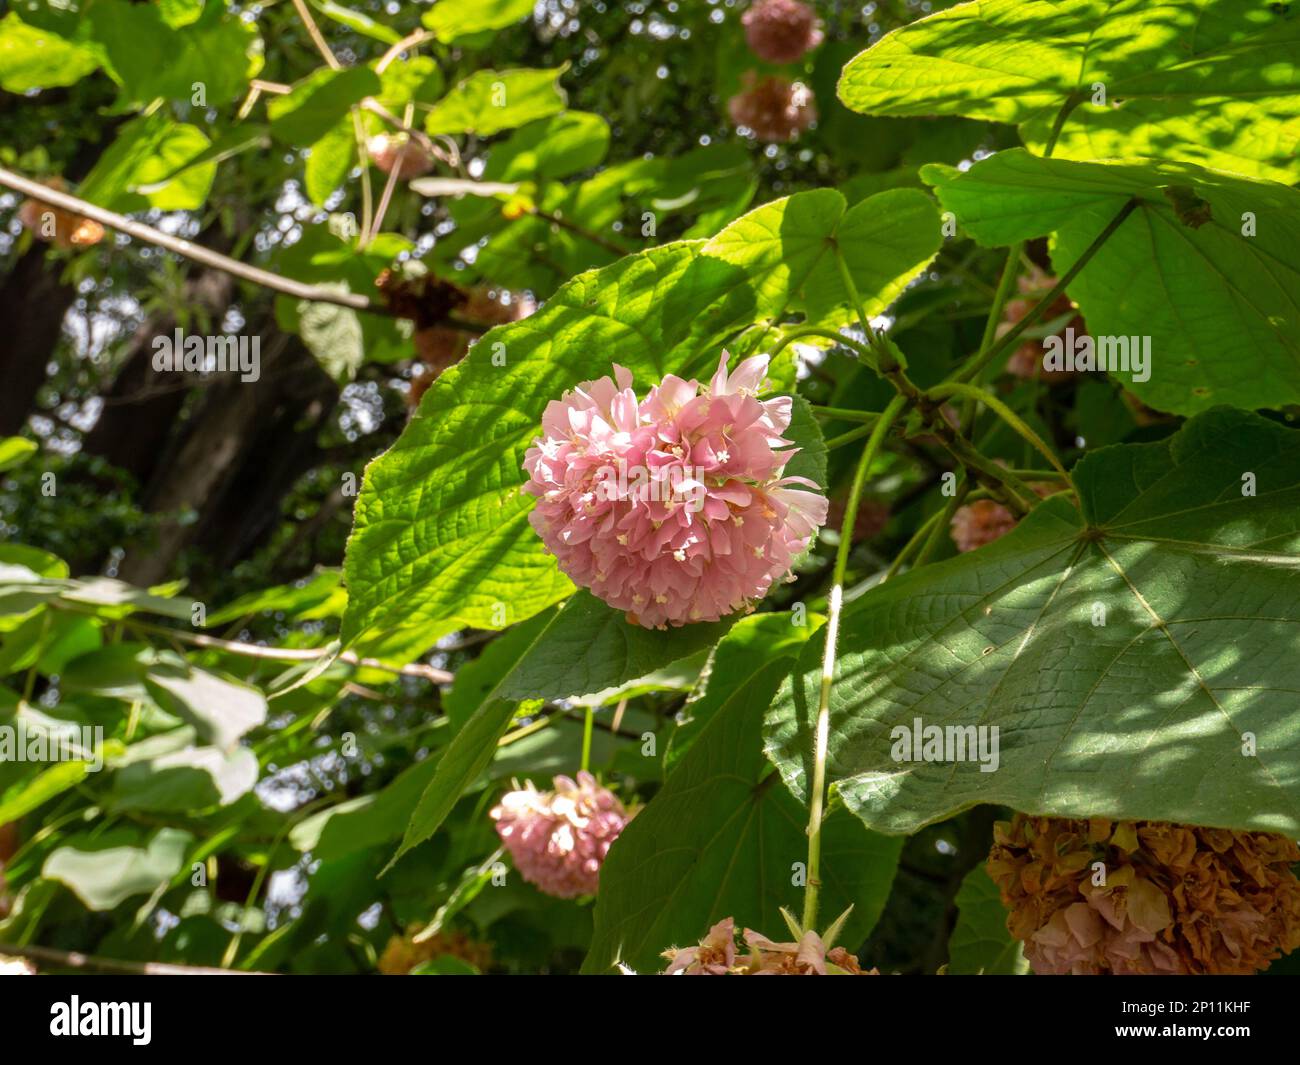 Dombeya wallichii or pinkball or pink ball tree or tropical hydrangea plant with pink flowers in the sunny garden Stock Photo